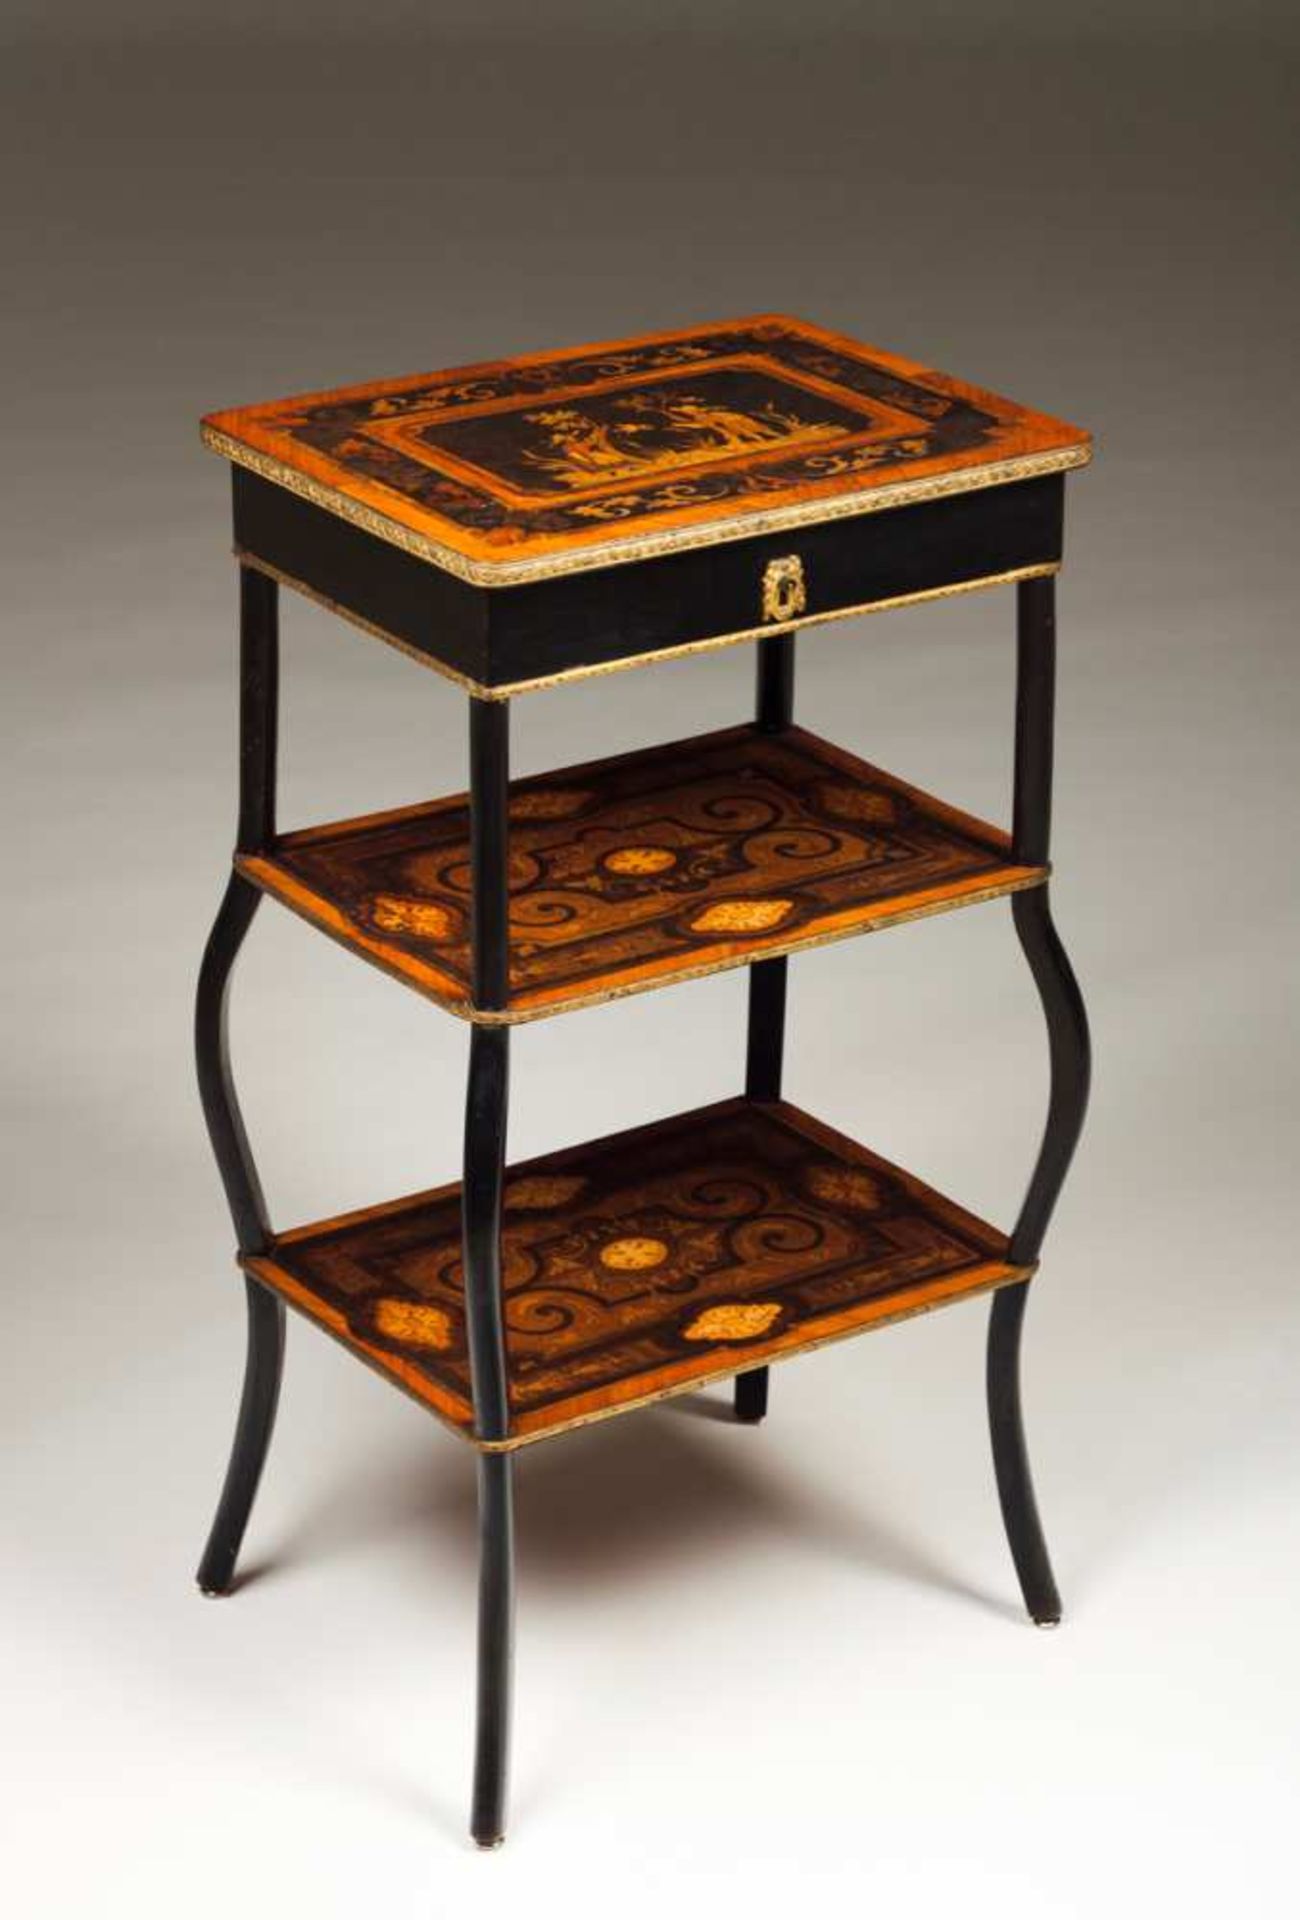 A Napoleon III Gueridon Walnut with marquetry decoration depicting scrolls, floral motifs and top